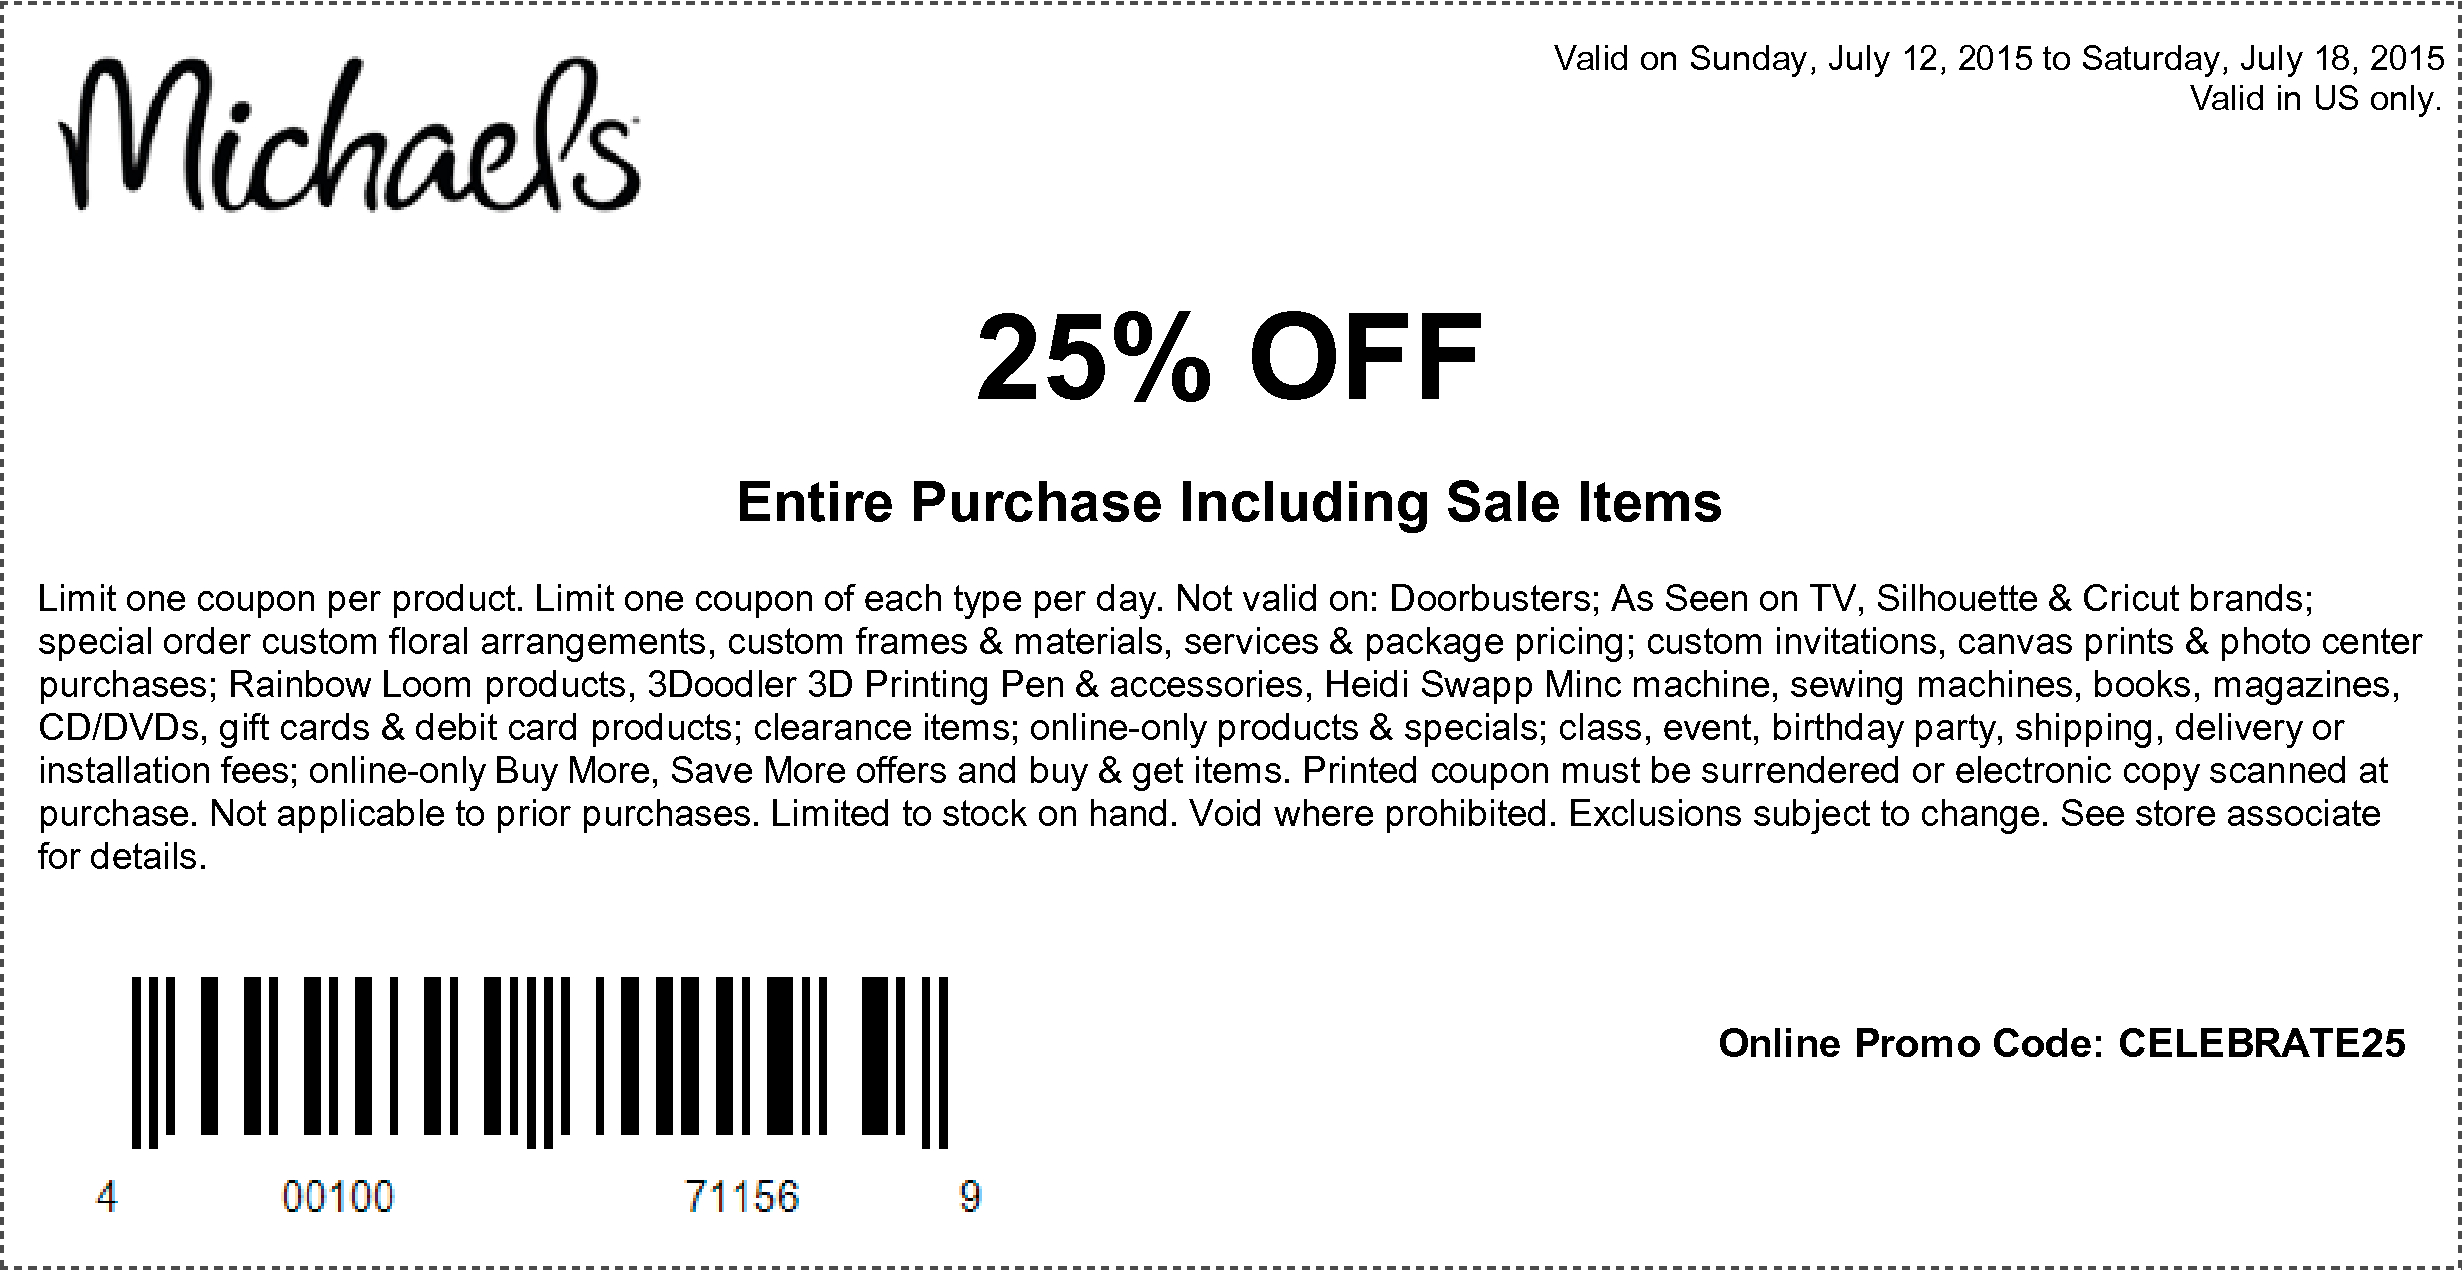 Michaels Free Shipping Coupon / Birthday Deals Twin Cities Mn Free